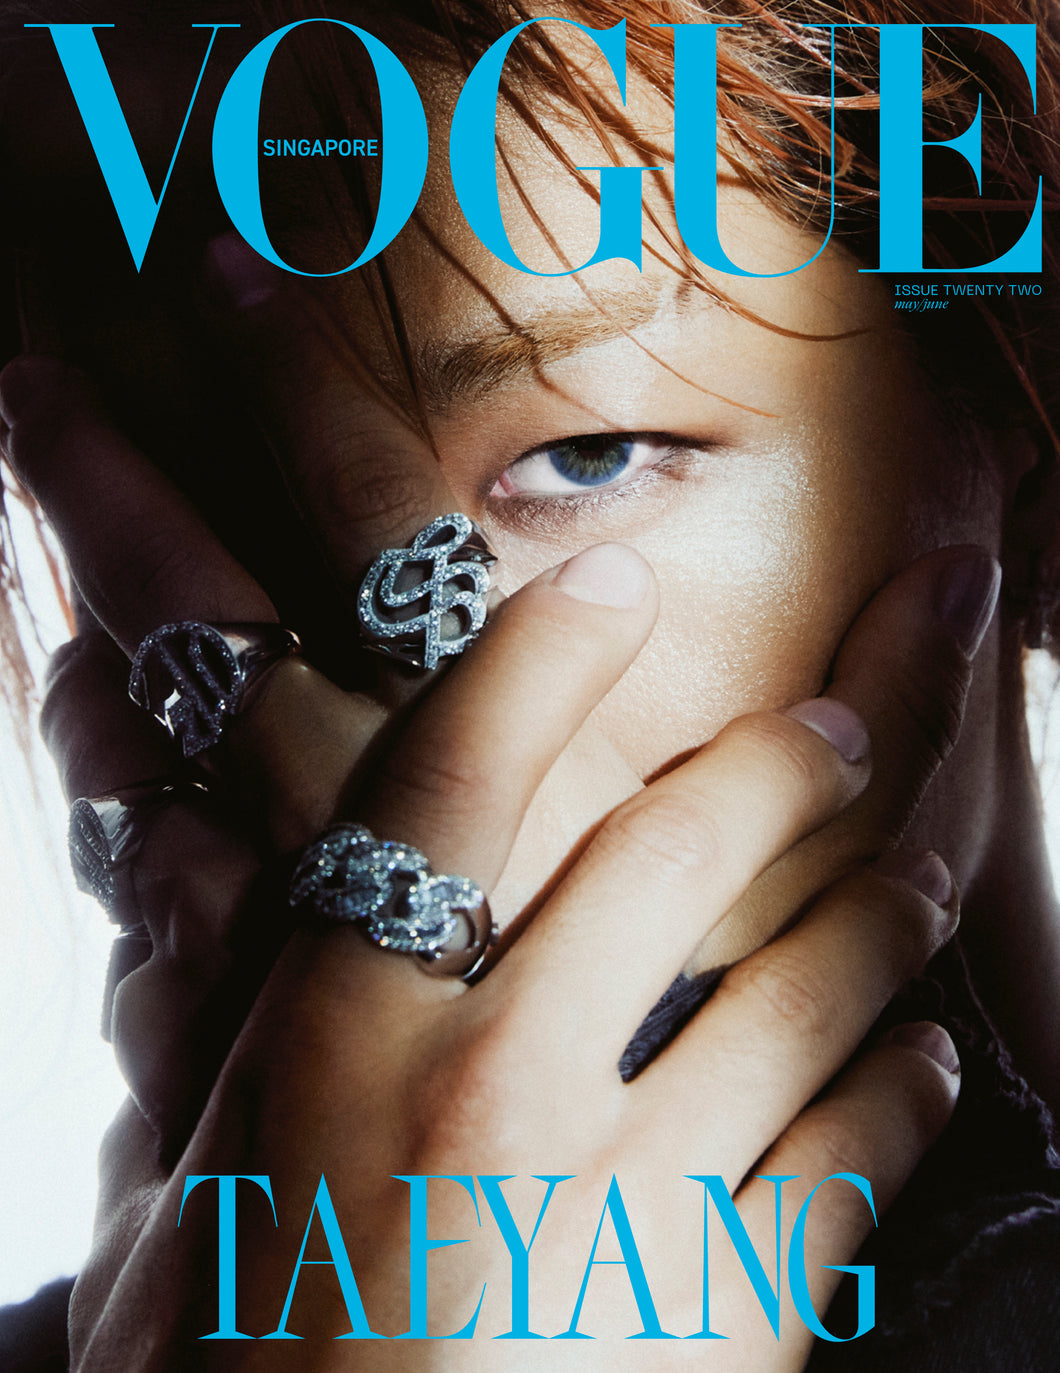 Vogue Singapore and Vogue Man: Issue Twenty Two, GUARDIAN